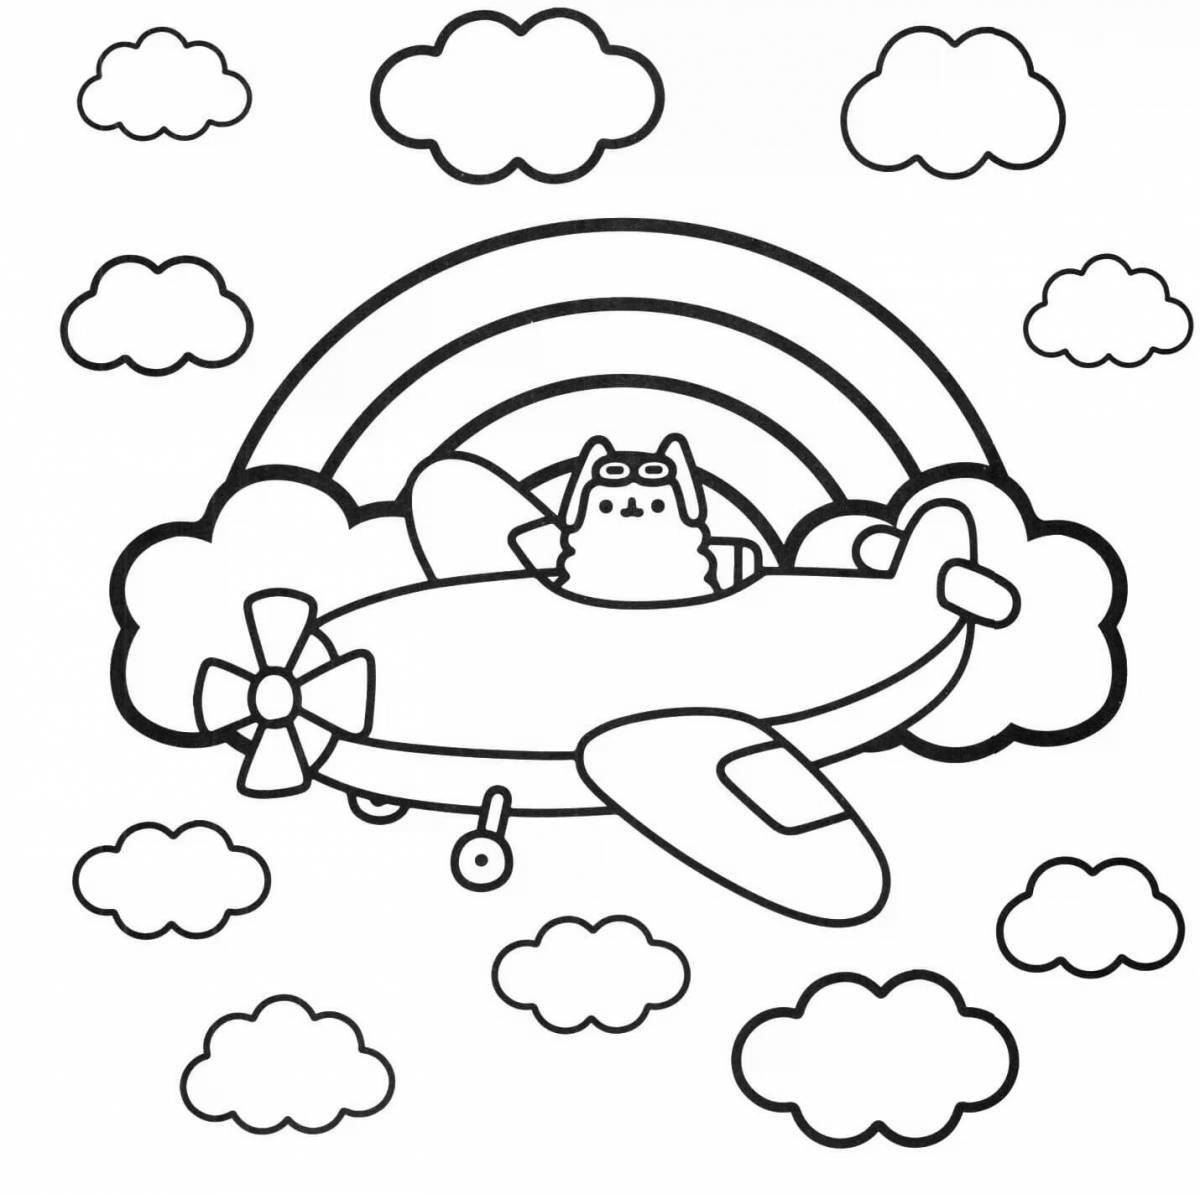 Adorable pusheen cat coloring page for kids